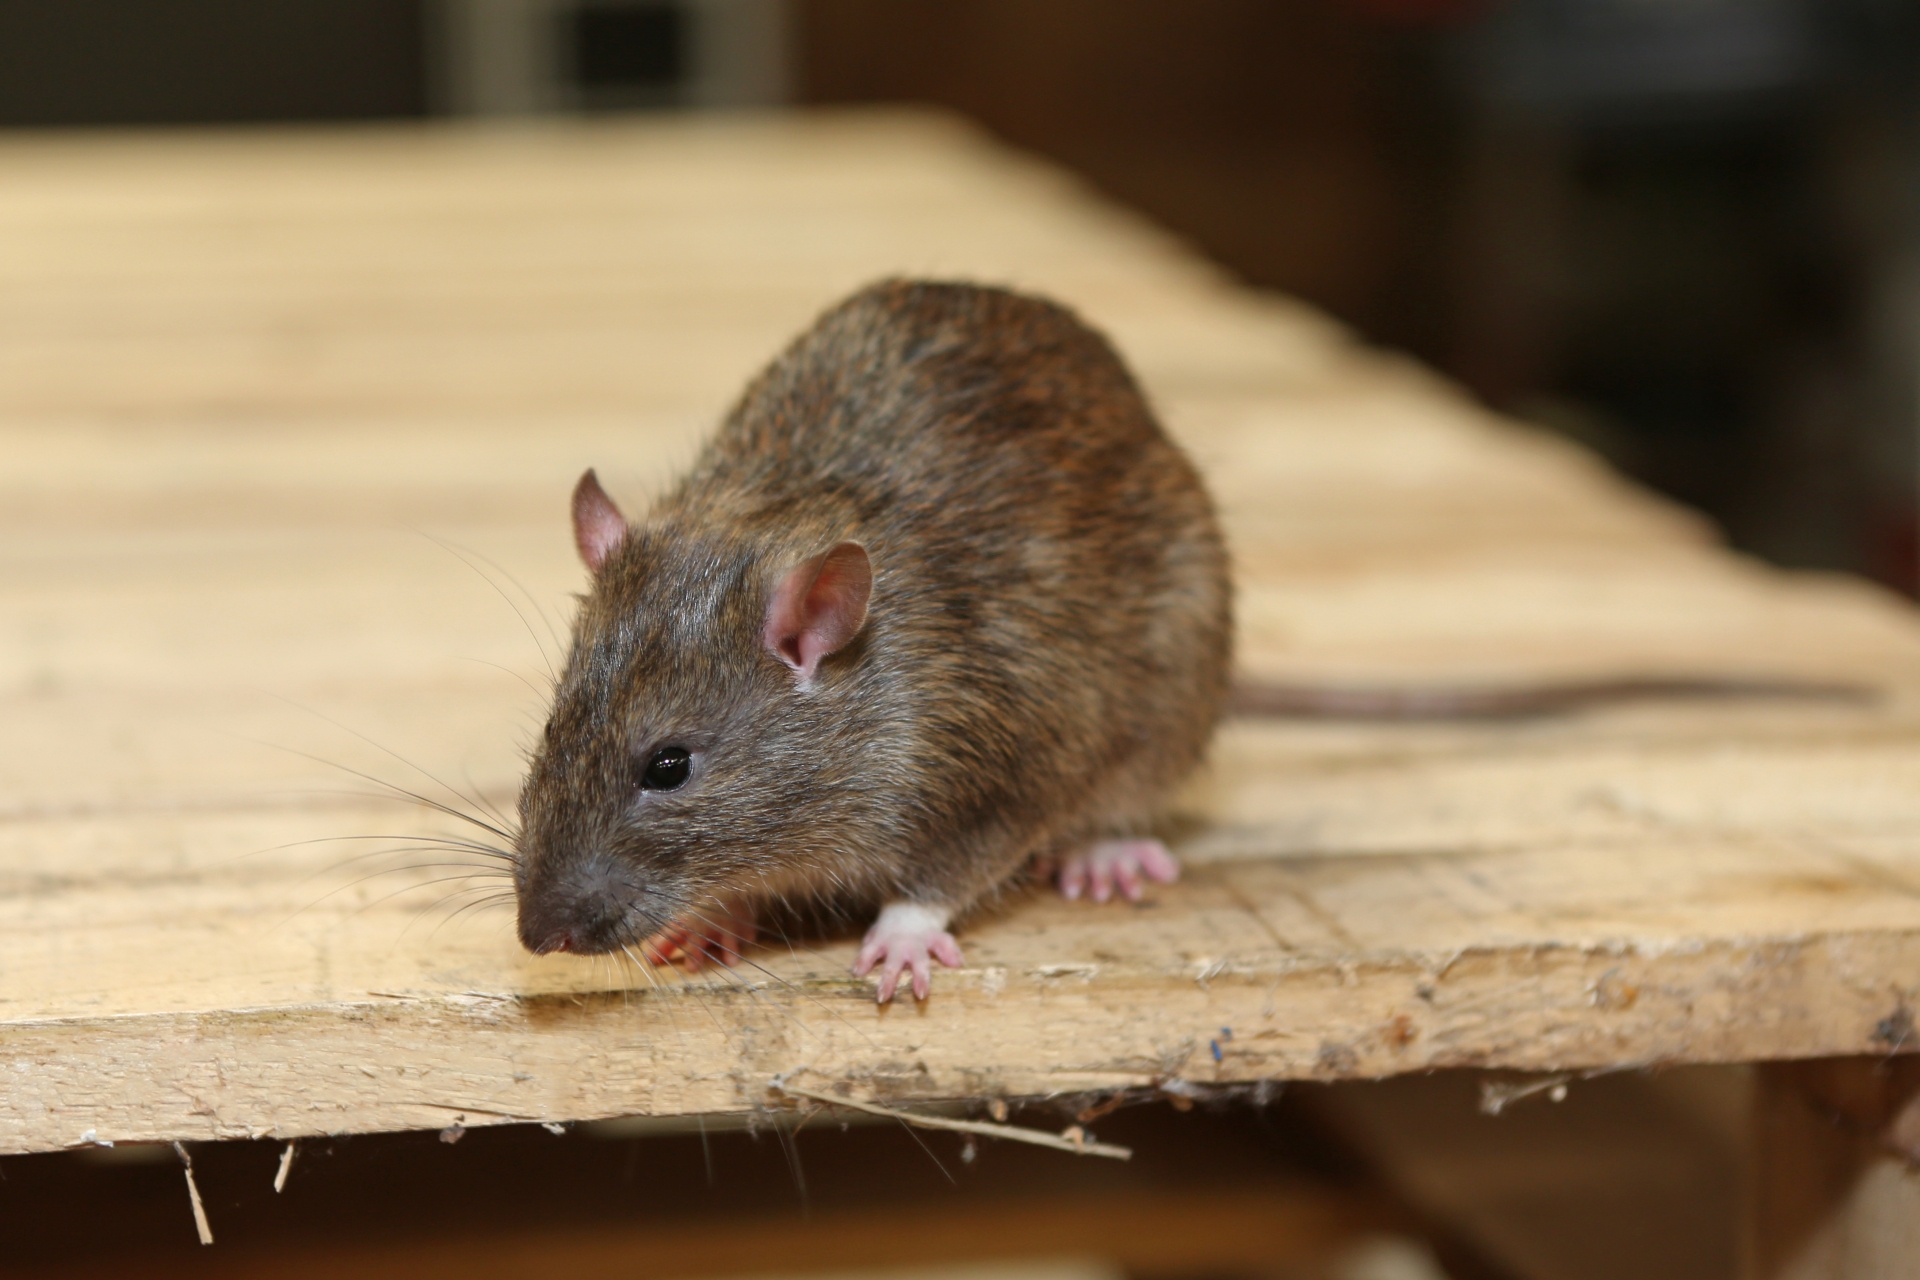 Rat extermination, Pest Control in Brent Cross, Hendon, NW4. Call Now 020 8166 9746